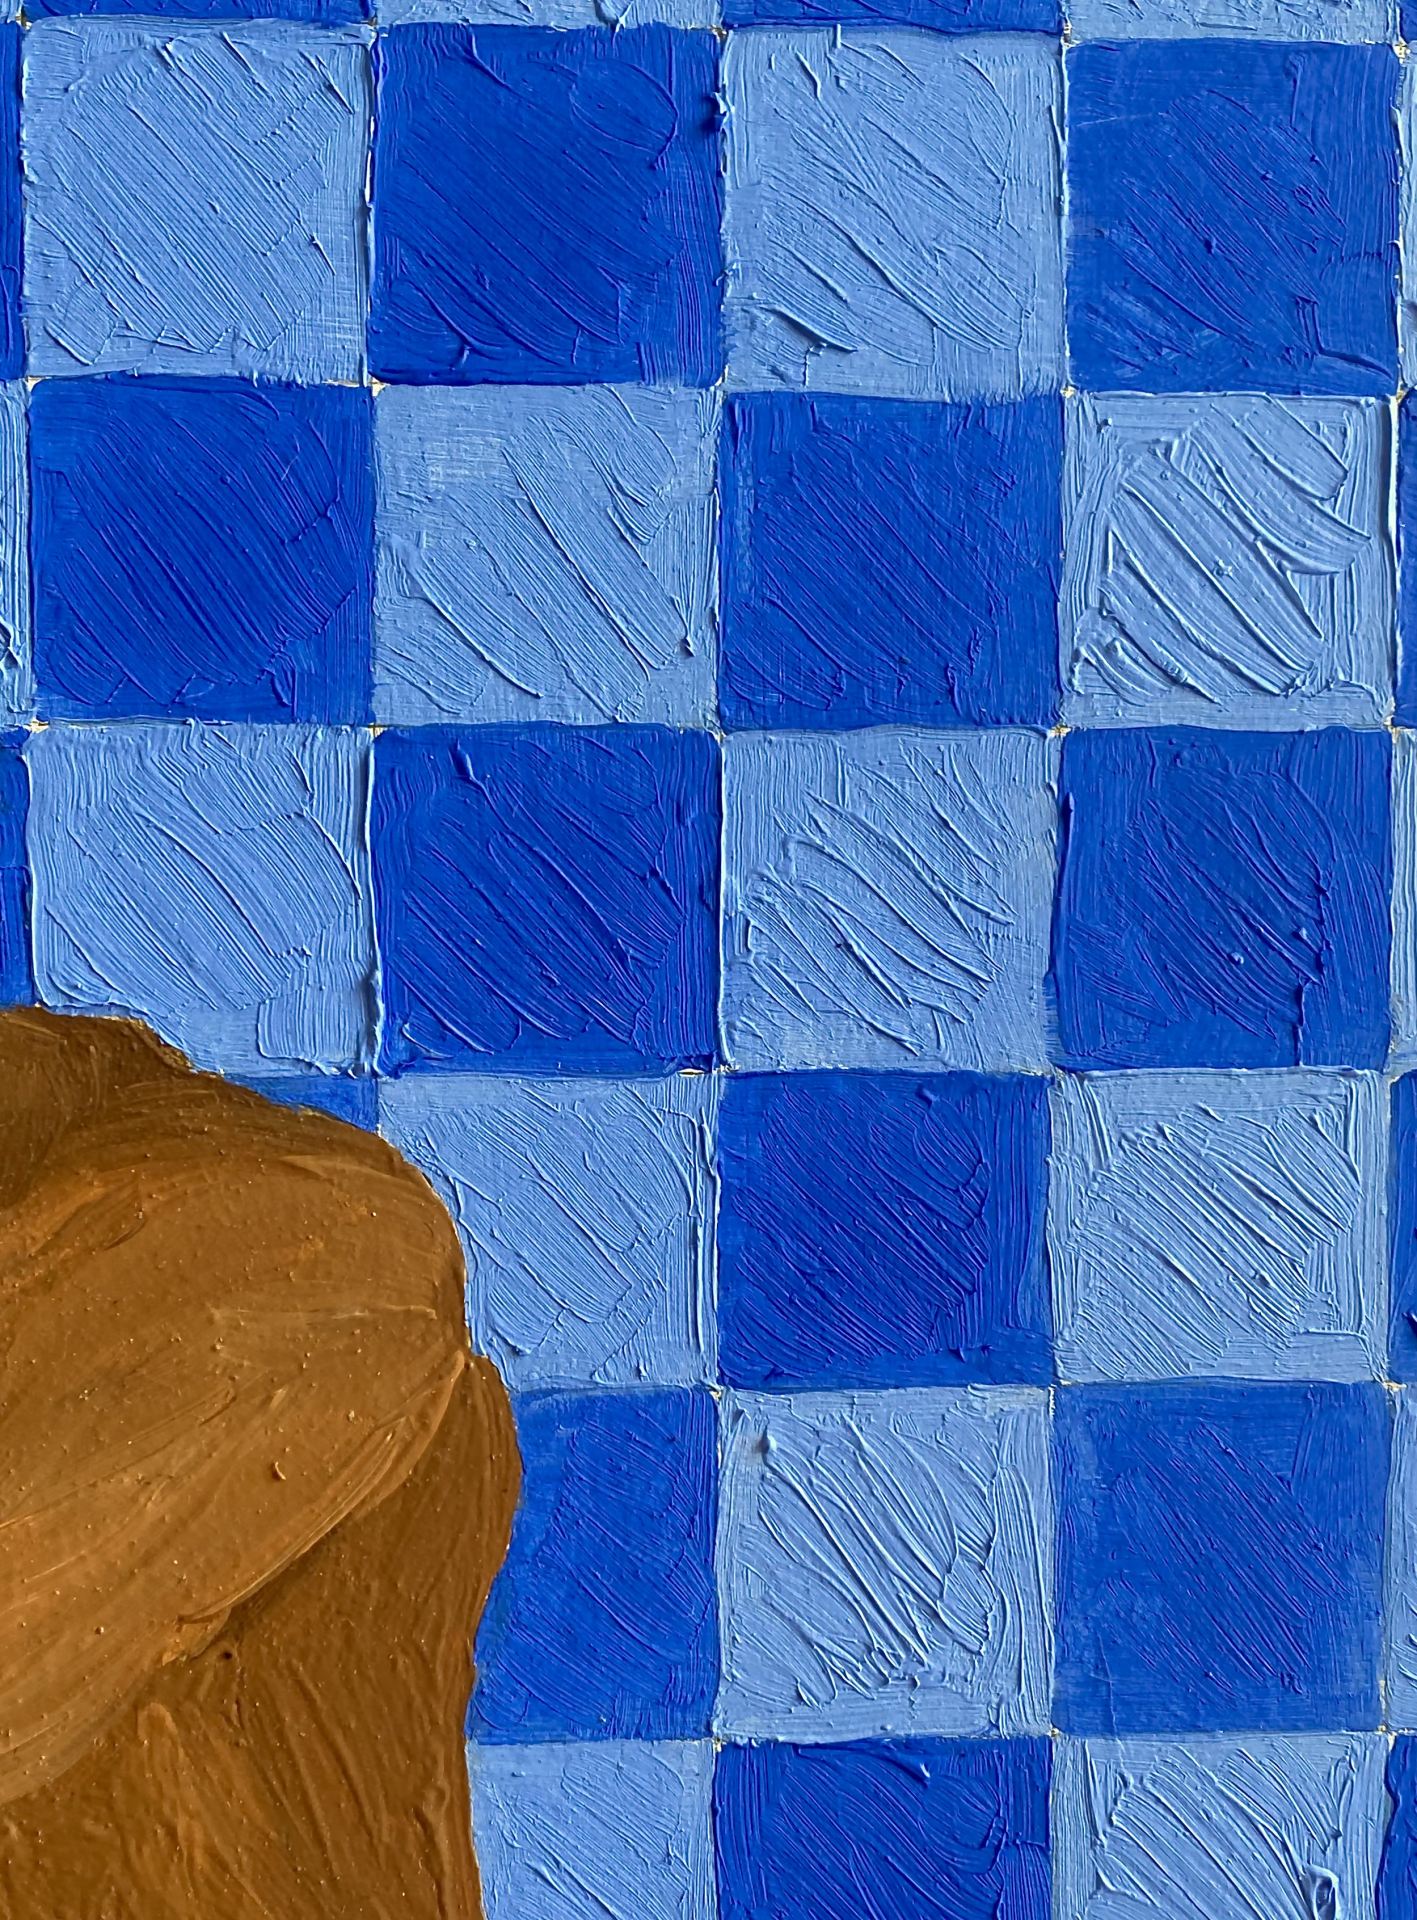 A detail from an oil painting
depicting a male figure sitting in a contemplative position in front of blue tiles.